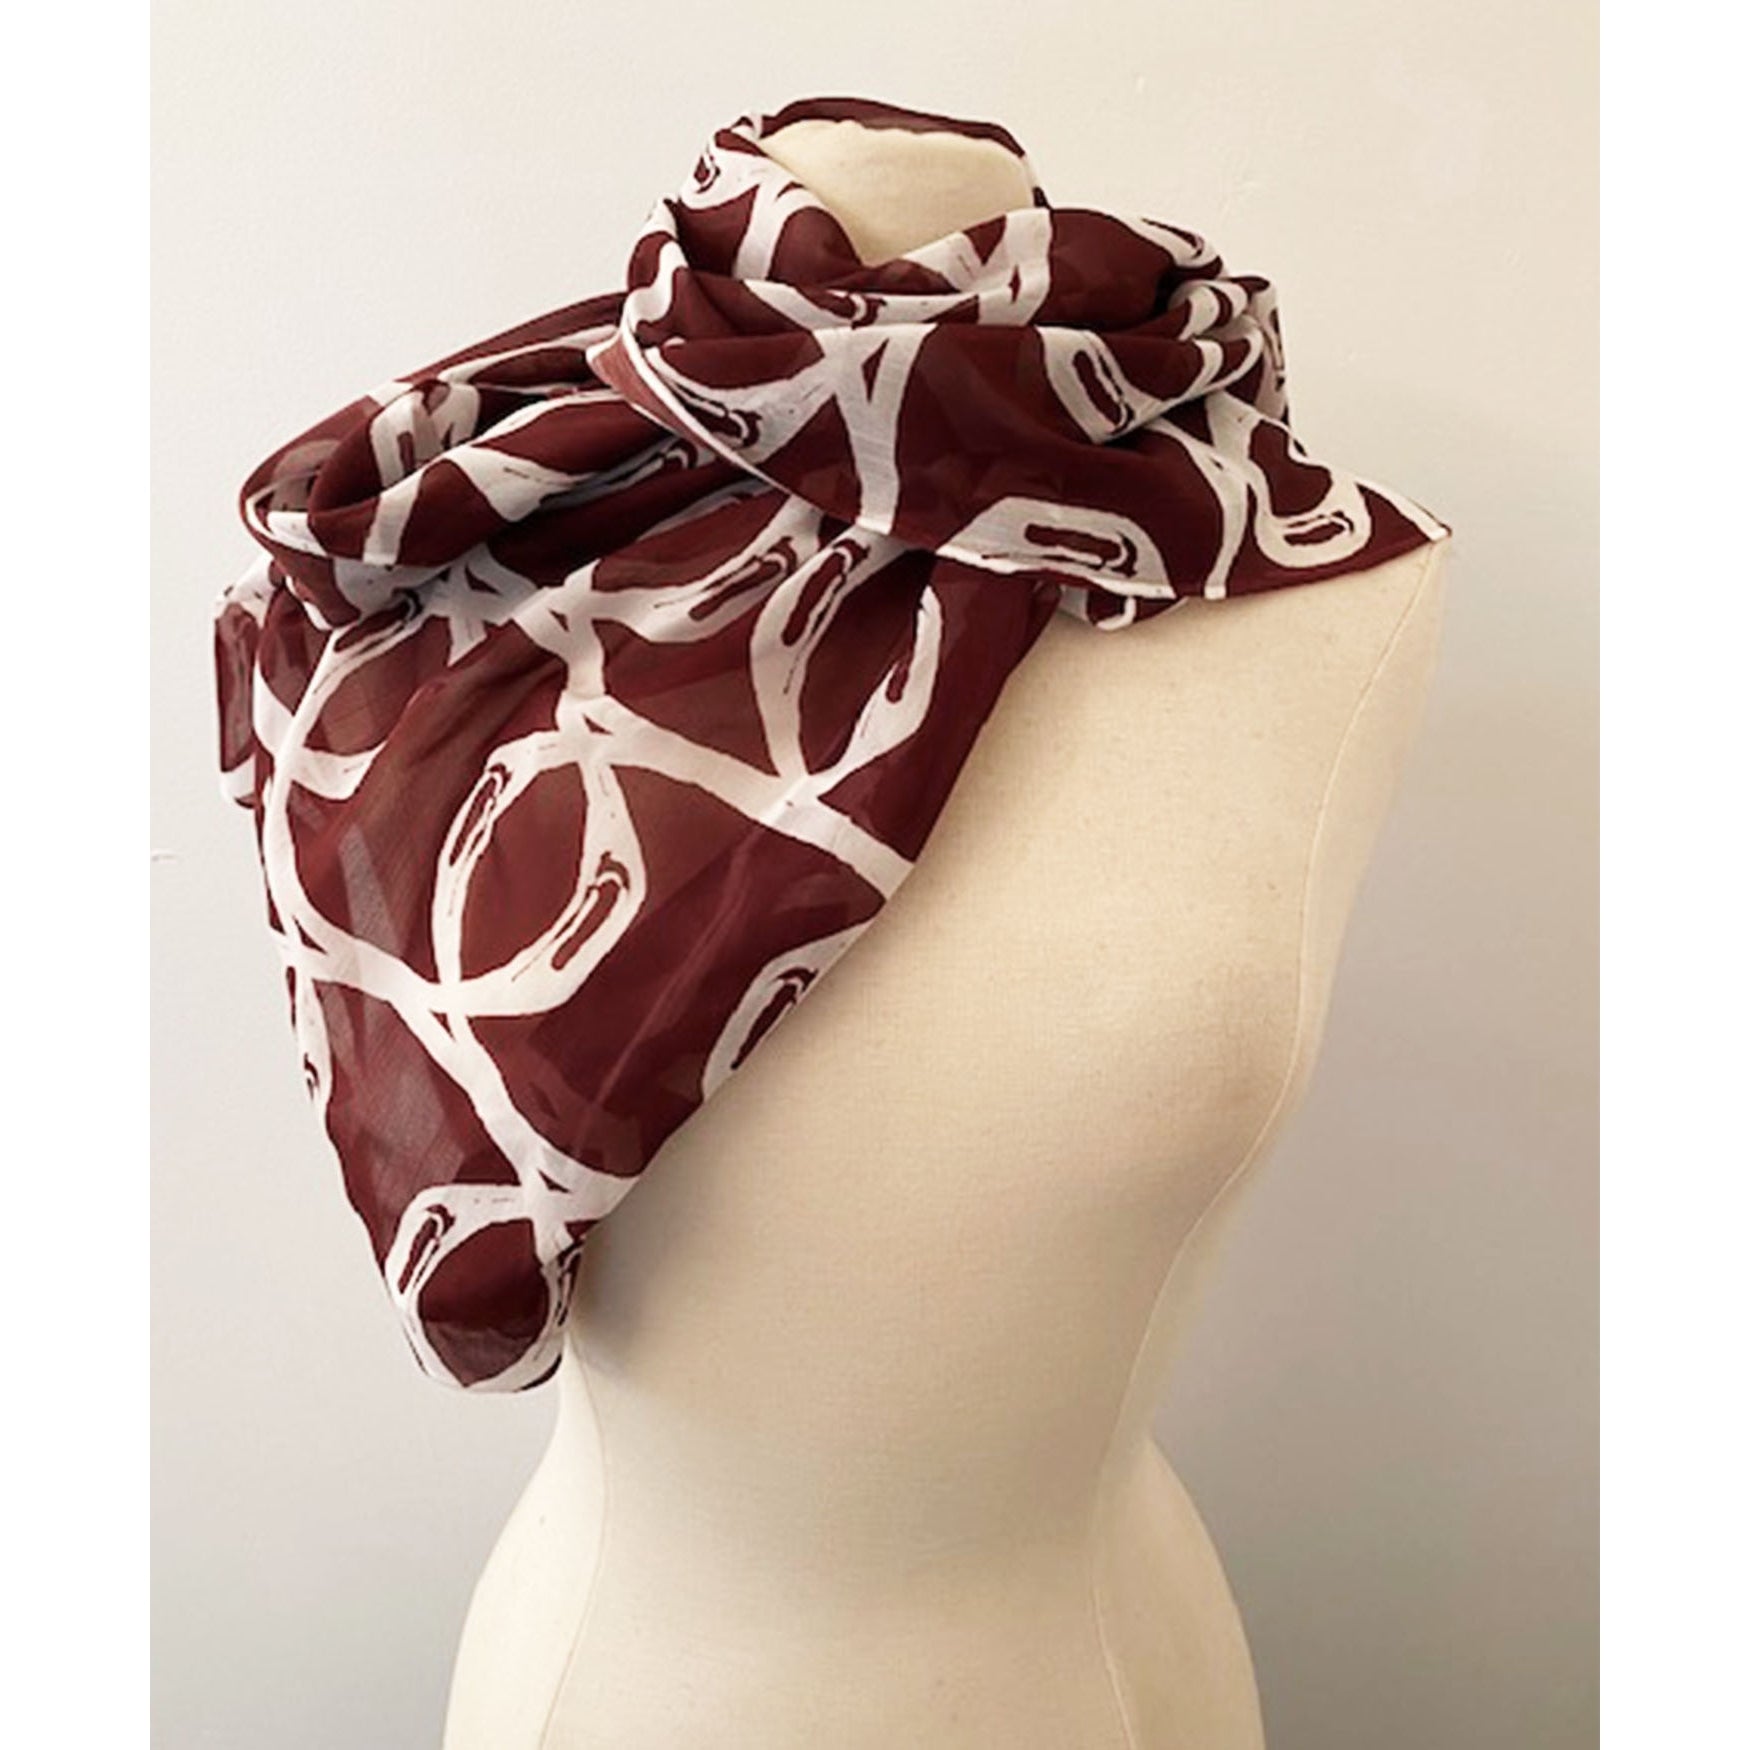 Anthracite birds and flowers scarf